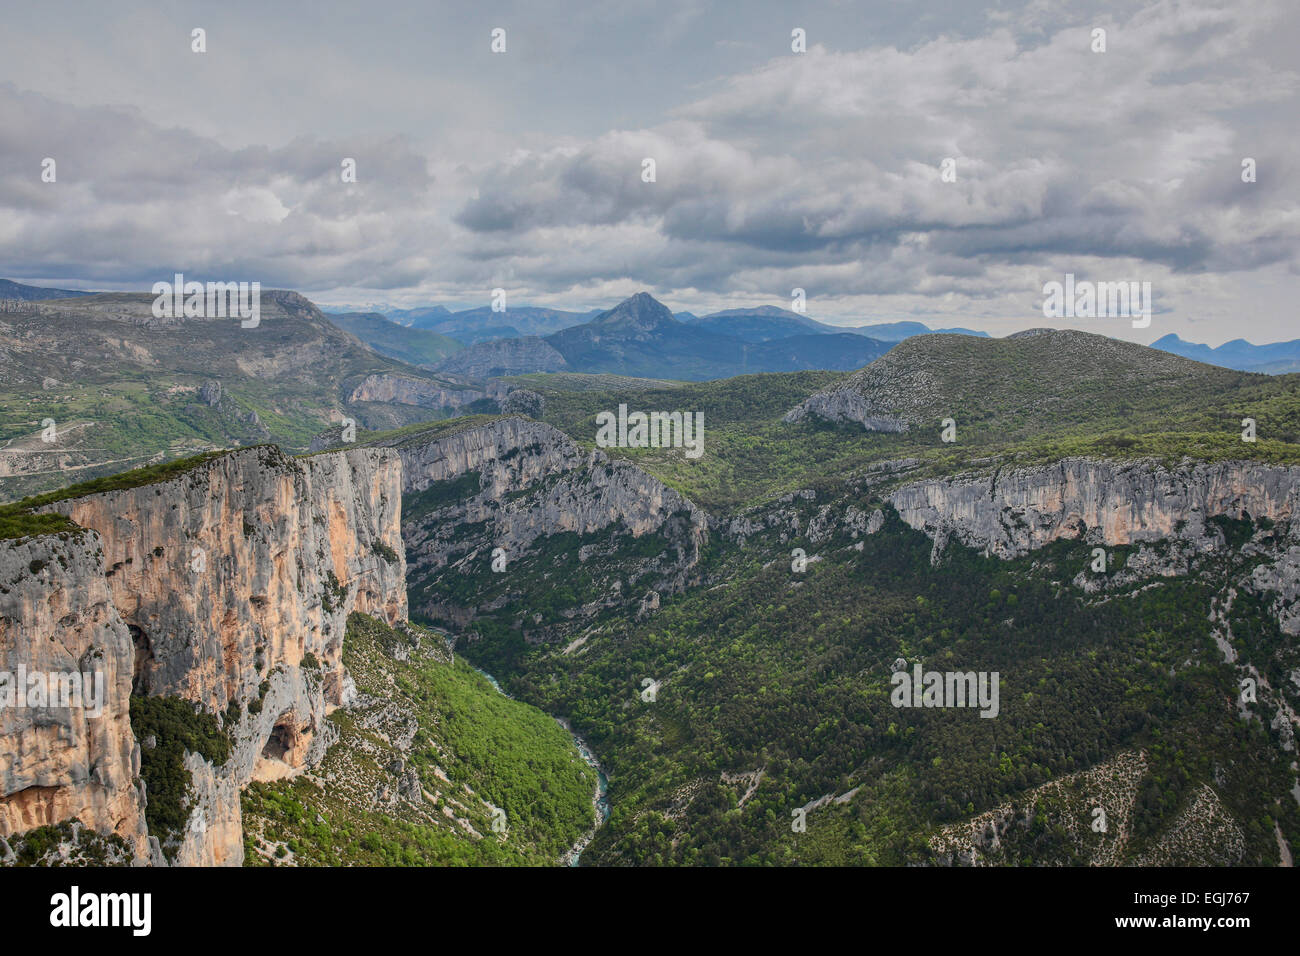 GORGE DU VERDON, FRANCE - MAY 11, 2014: A view of the Gorge du Verdon (Verdon Gorge) in southern France. Stock Photo